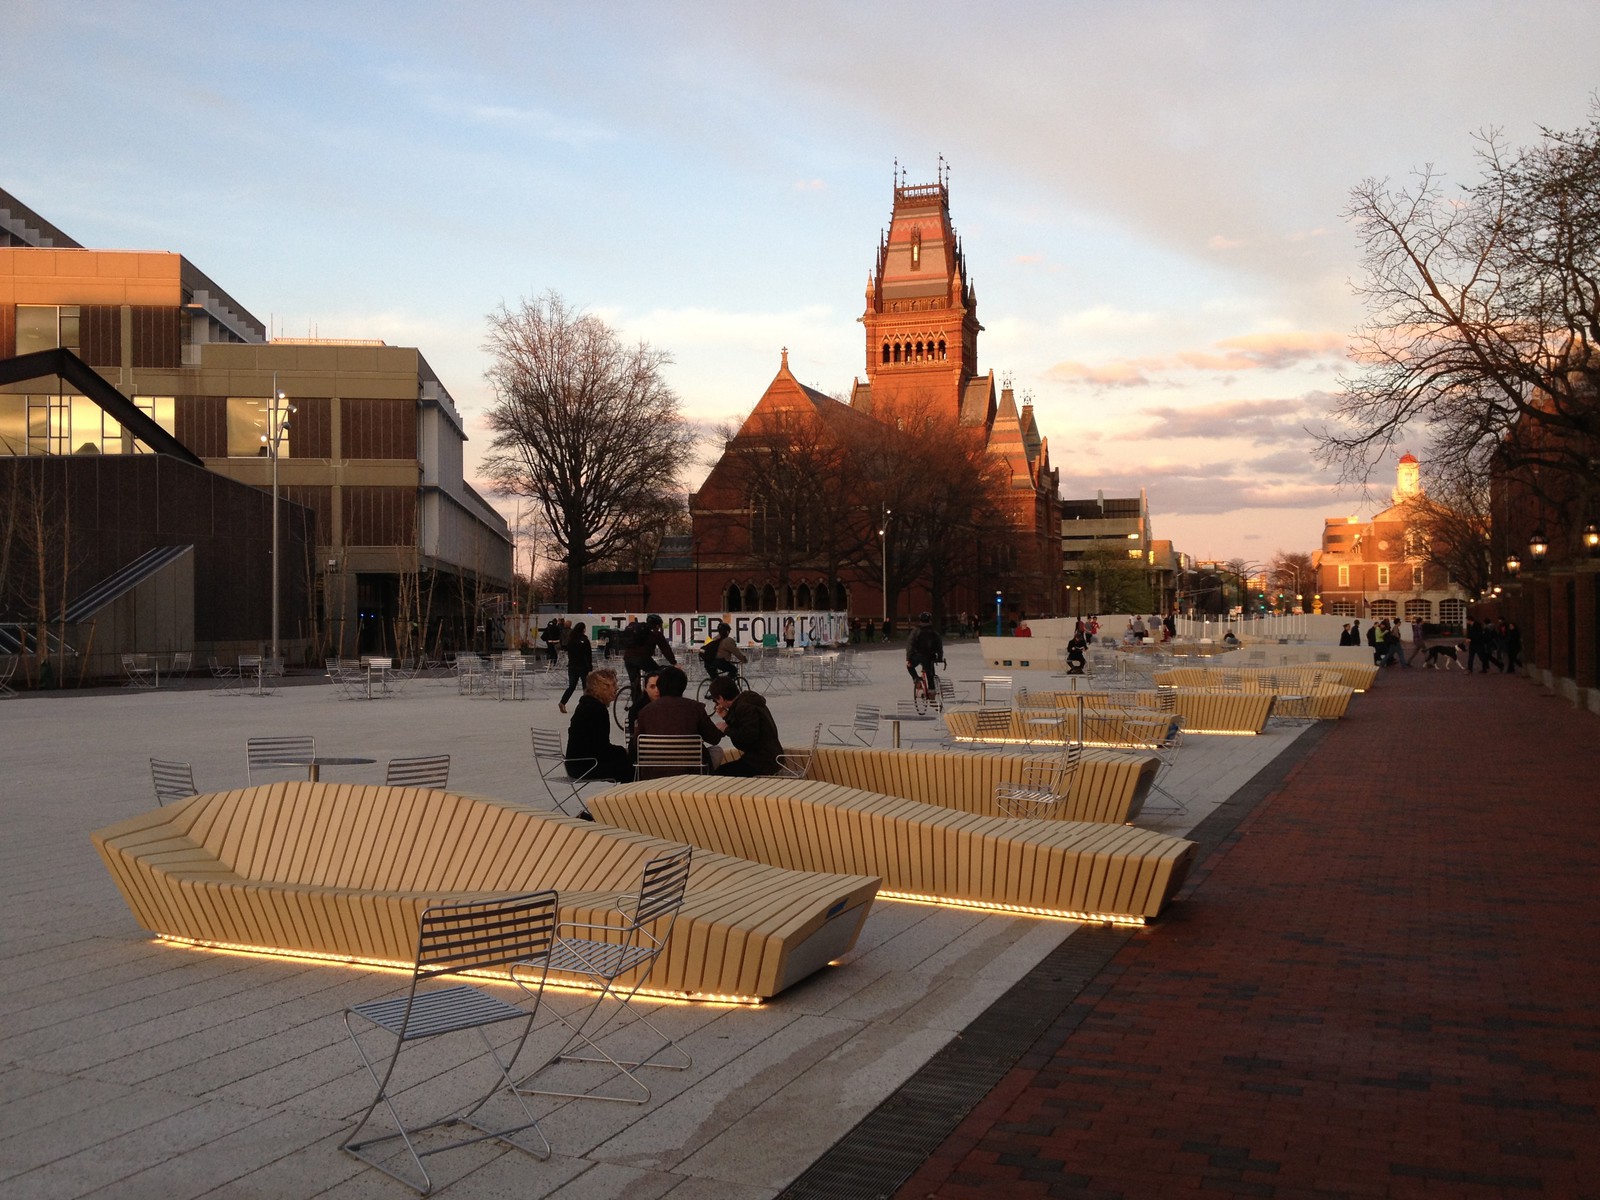 The new benches fit right into the historical landscape of Harvard University.